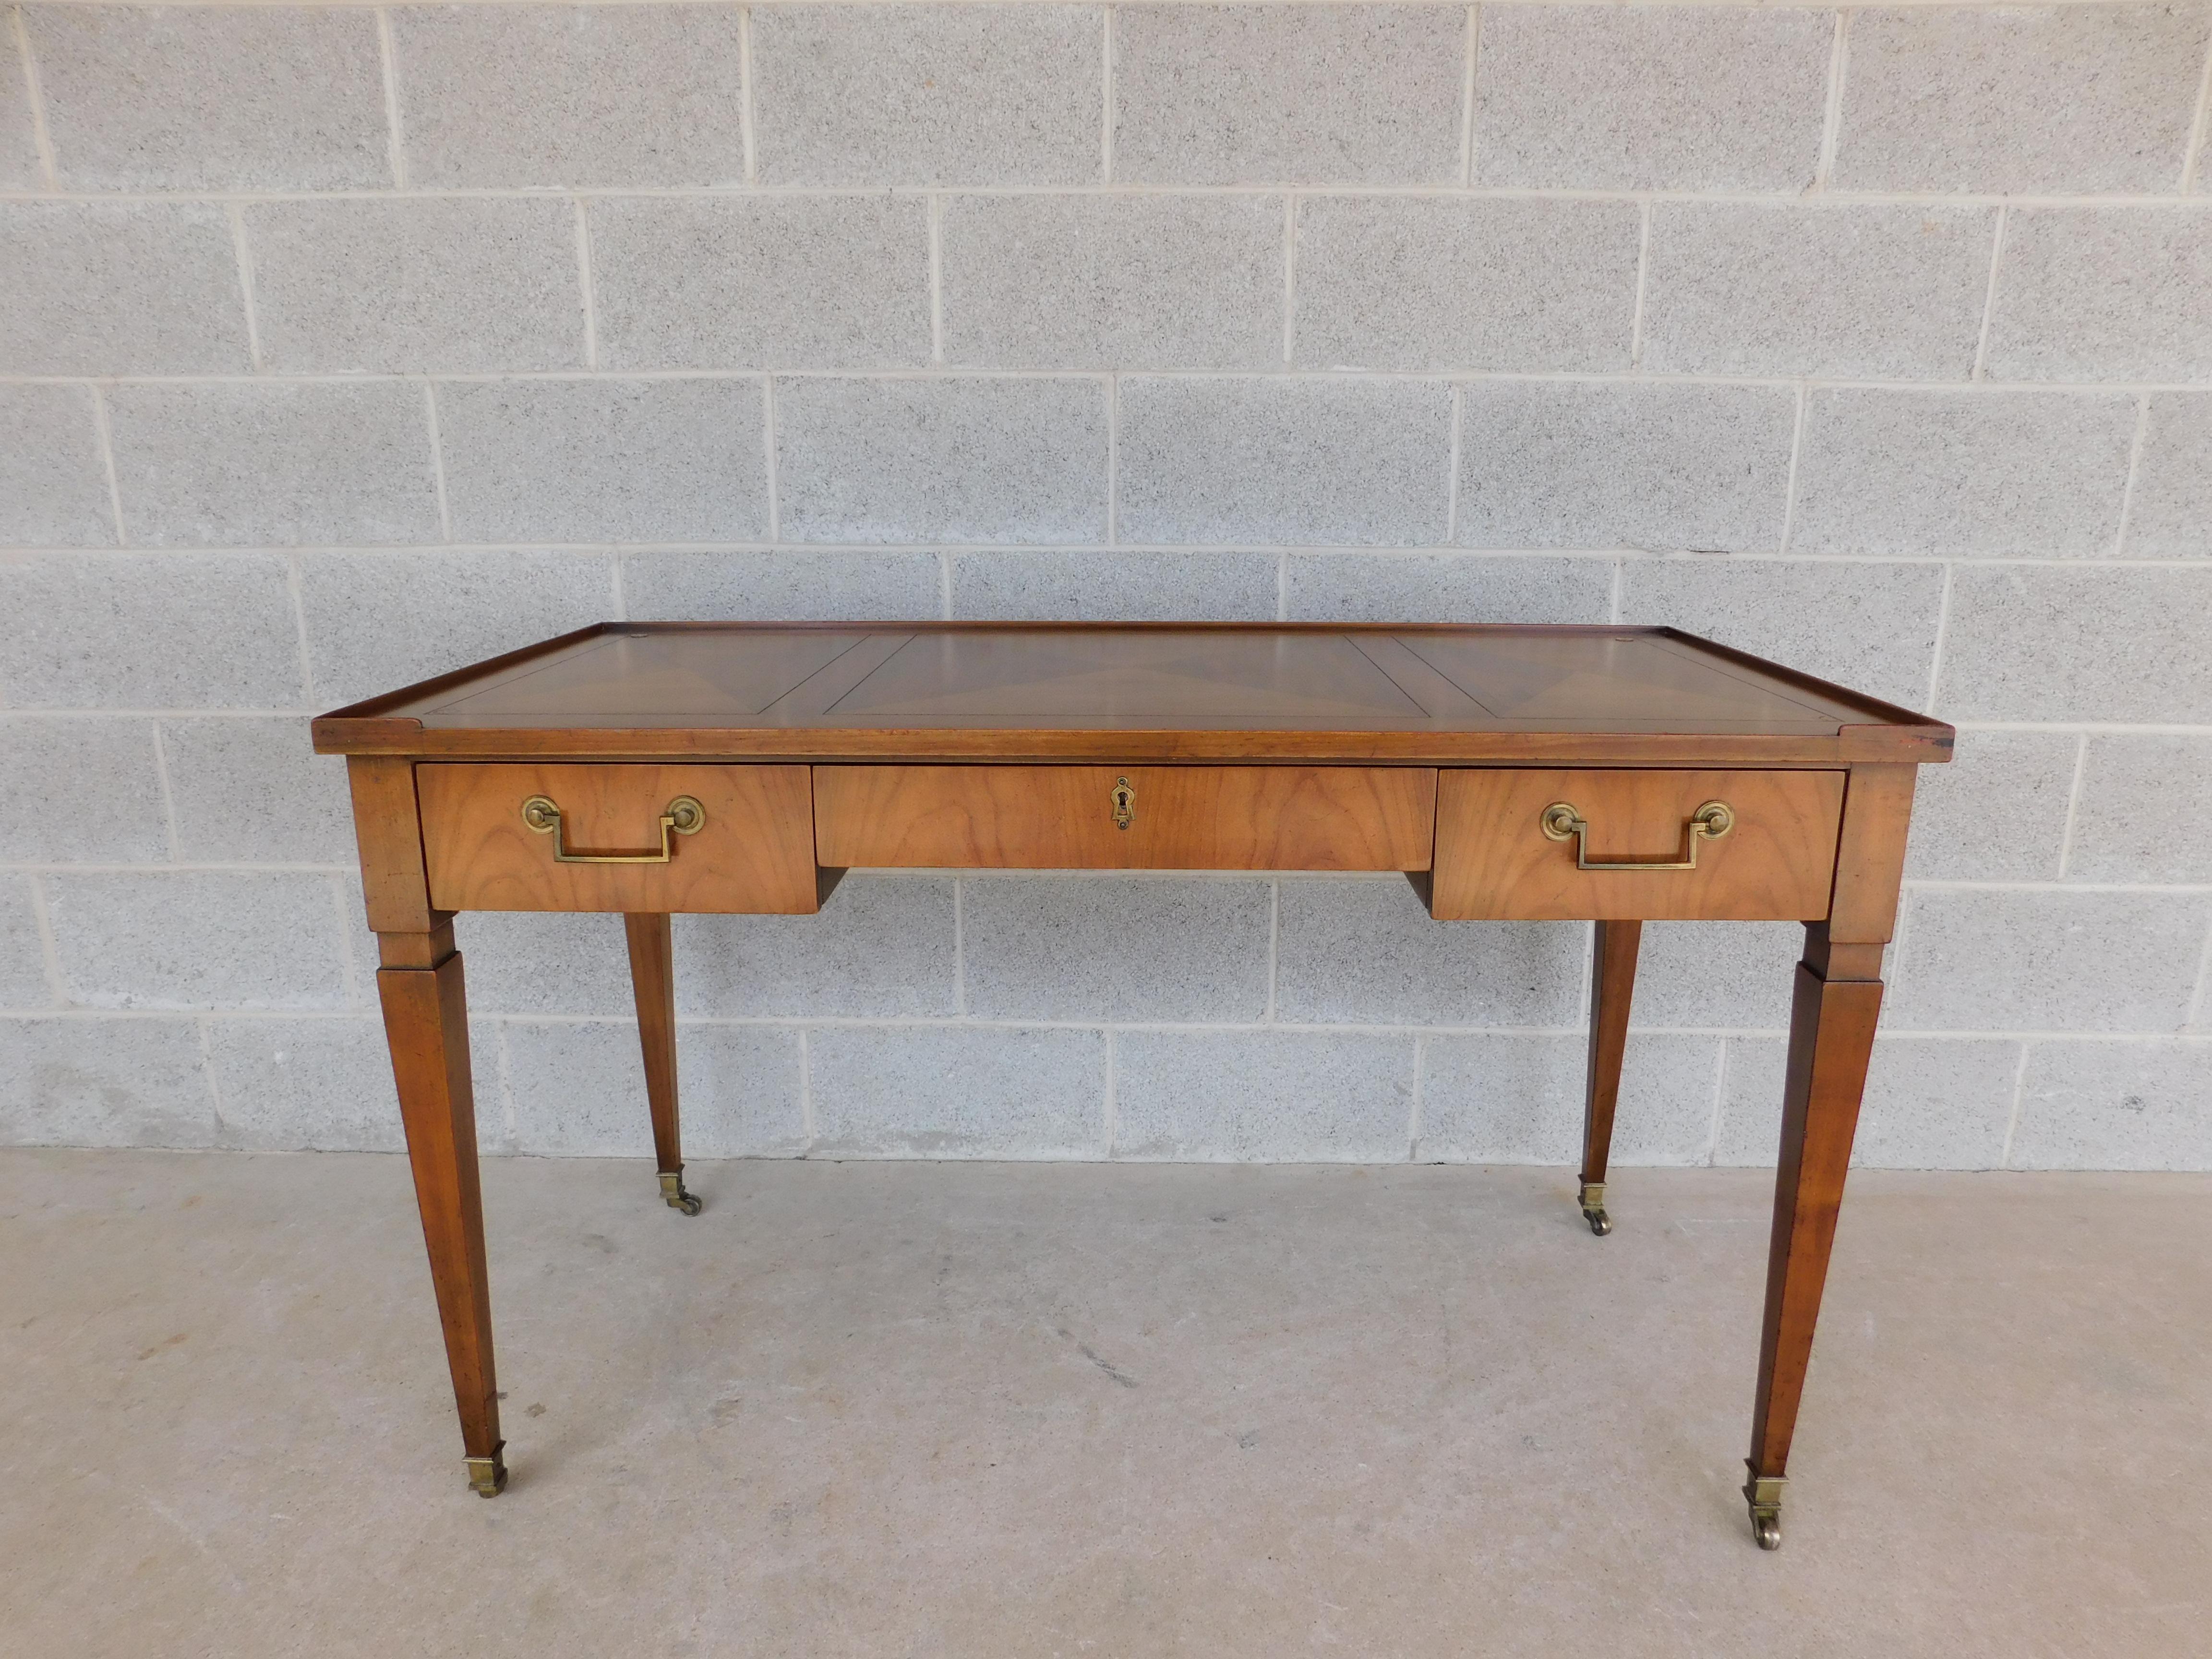 Midcentury Baker Furniture Regency style writing desk. Raised border edge surrounding the diamond pattern three part writing surface. 3 Dovetailed drawers, with brass pulls on the flanking left, and right drawers. Center locking drawer with original